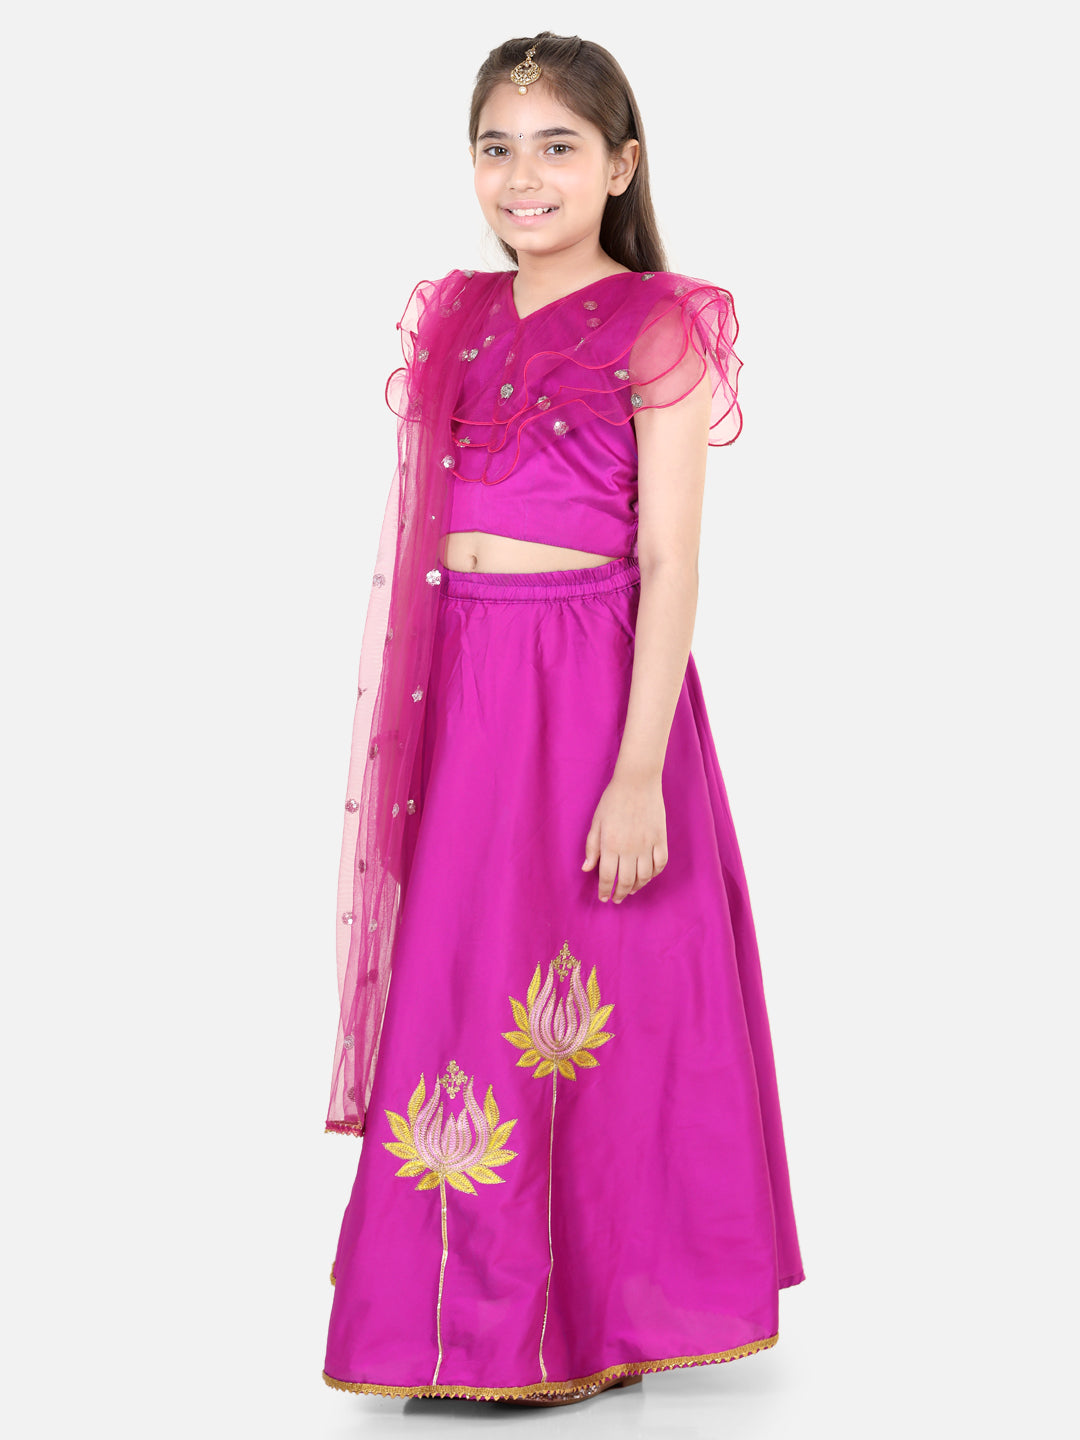 BownBee Lotus Embroidery Lehenga with Ruffle Sequin Top for Girls and Cotton Full Sleeve Cotton Kurta Pajama for Boys- Pink